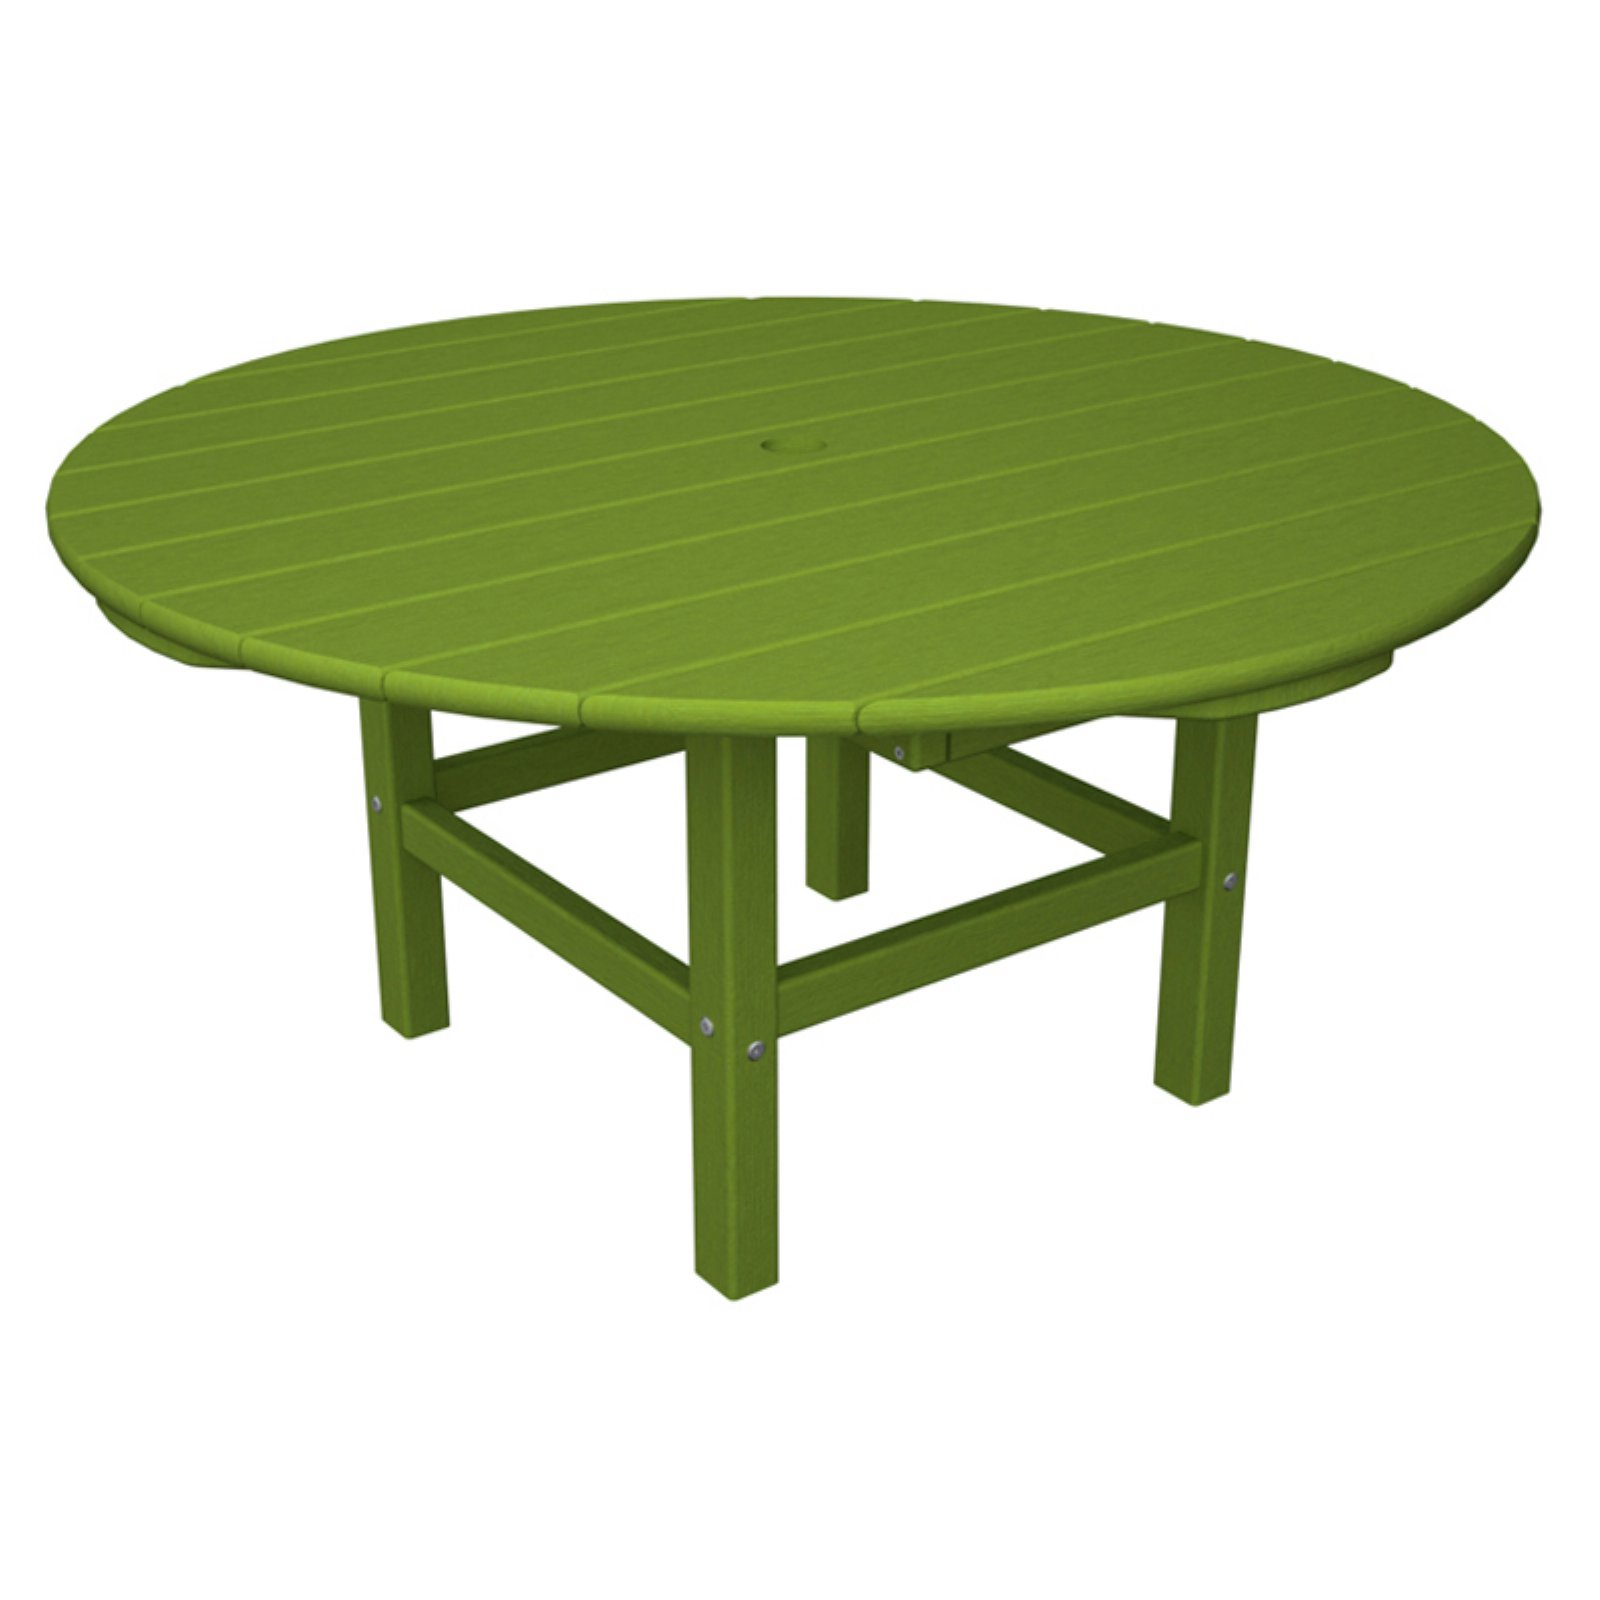 POLYWOOD® Classic Recycled Plastic Conversation Table - 38 in. Vibrant Colors - image 1 of 2